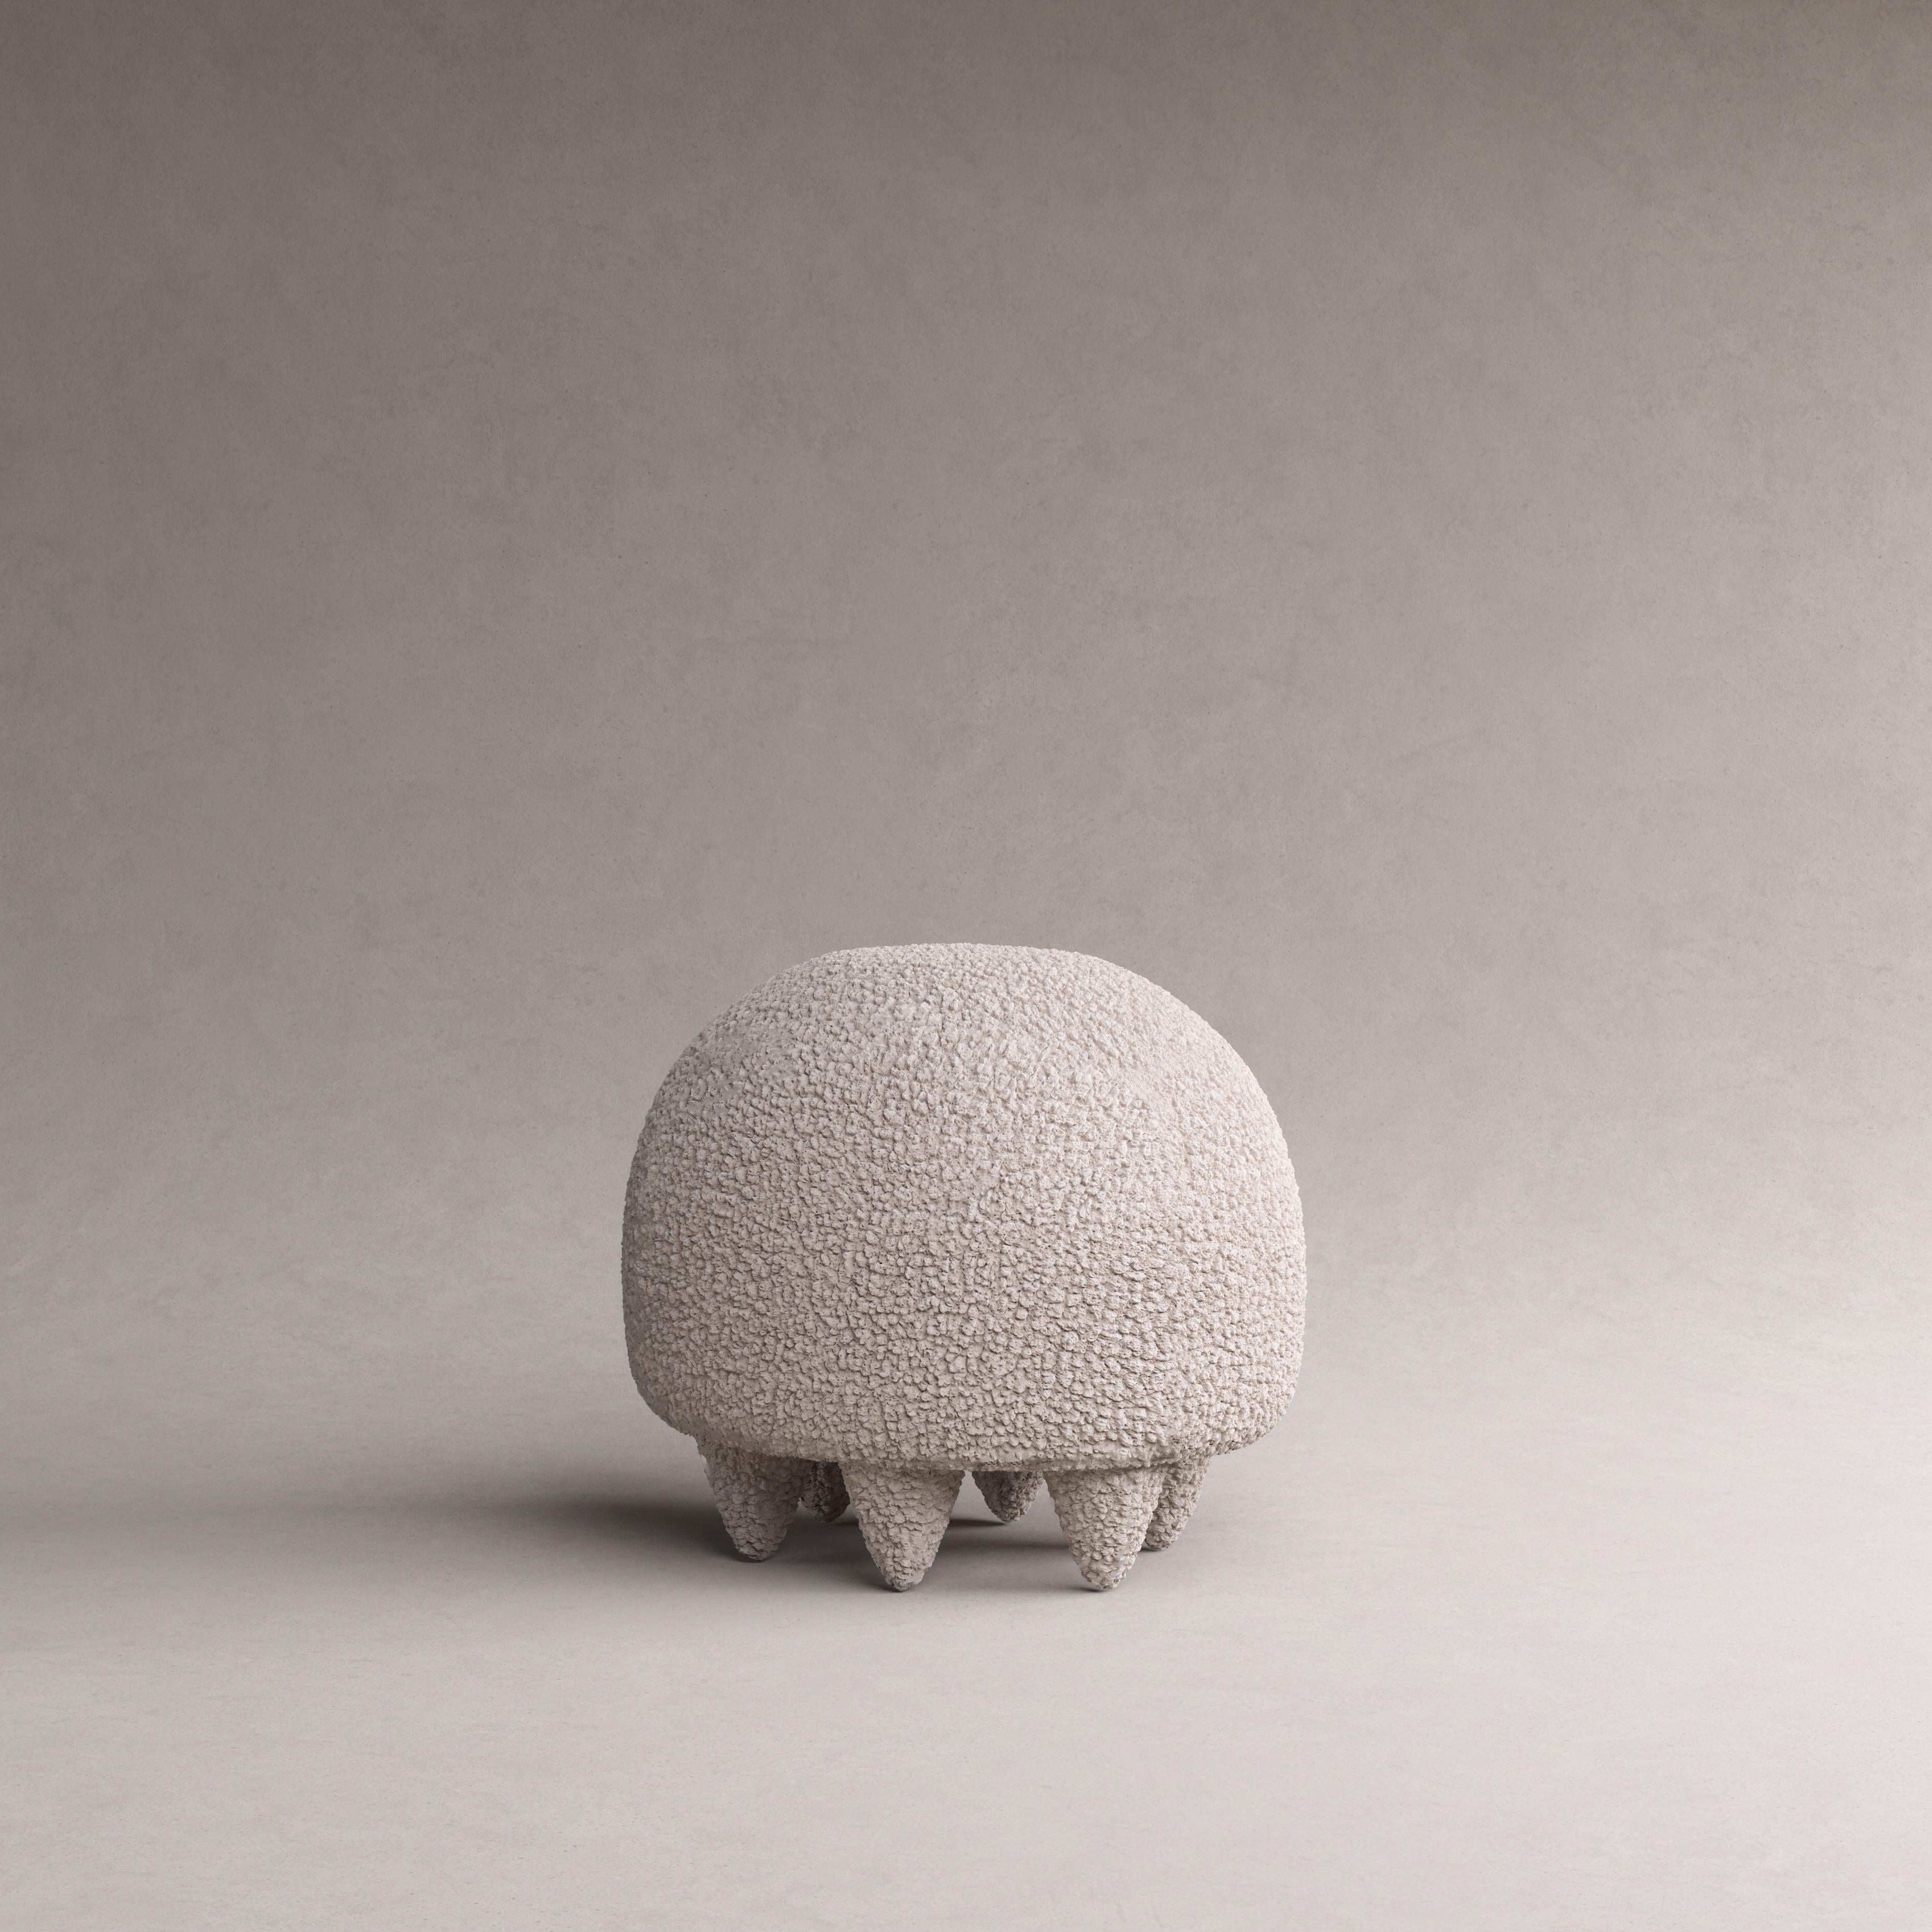 Medusa stool by Pietro Franceschini
Sold exclusively by Galerie Philia
Manufacturer: Stefano Minotti
Dimensions: W 47 x L 60 x H 55cm
Materials: Lamb 

Also available in Bouclé 

Pietro Franceschini is an architect and designer based in New